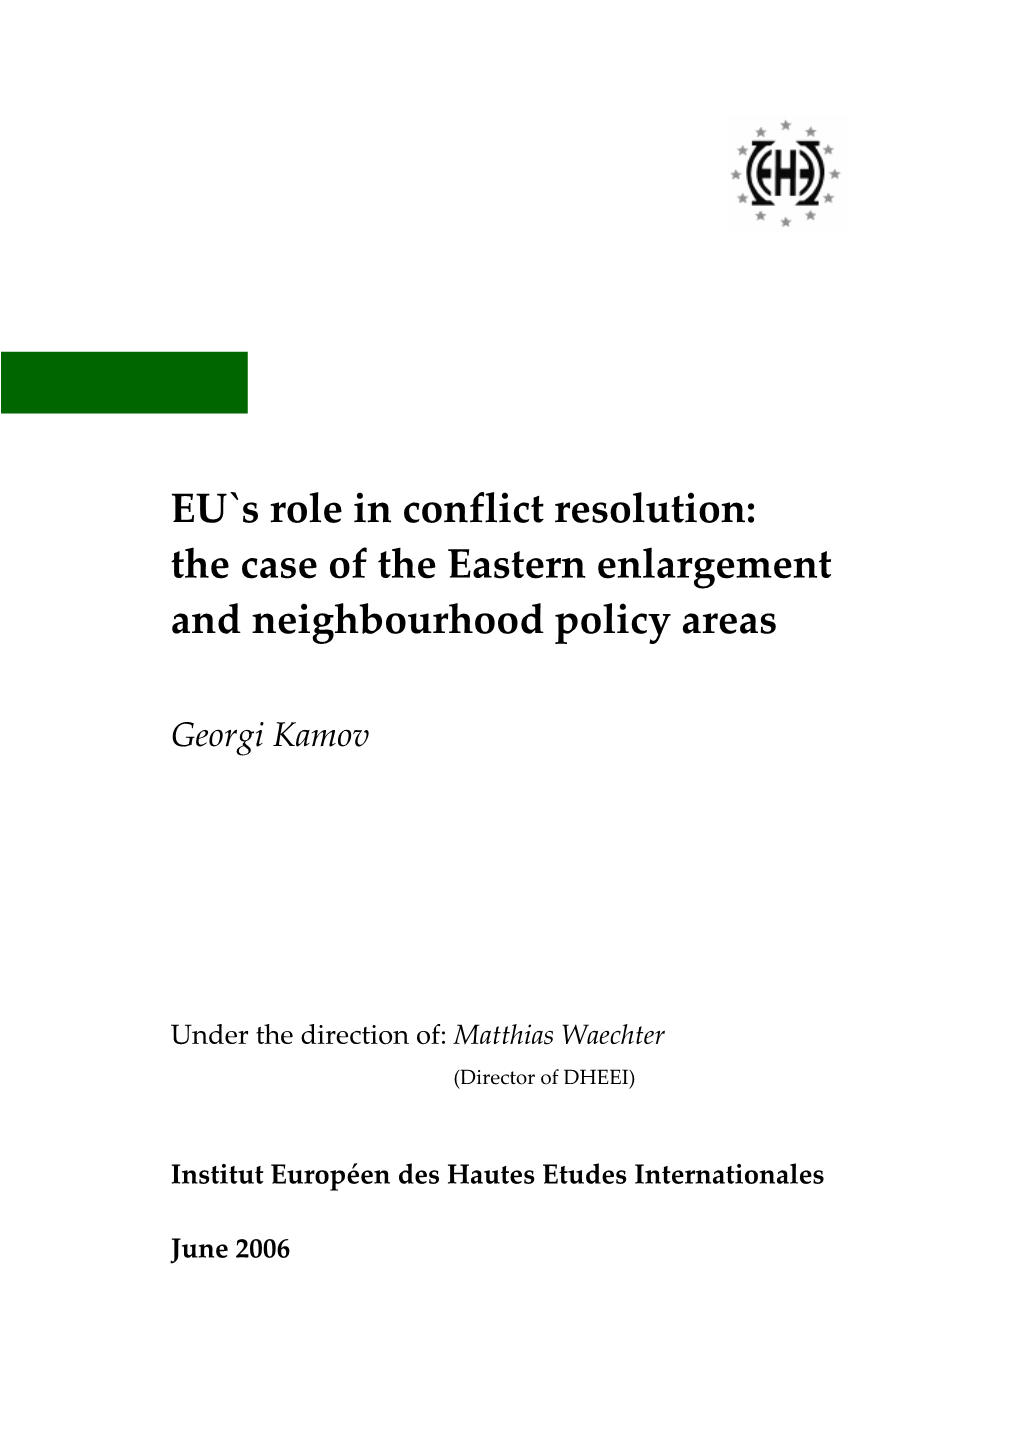 EU`S Role in Conflict Resolution: the Case of the Eastern Enlargement and Neighbourhood Policy Areas